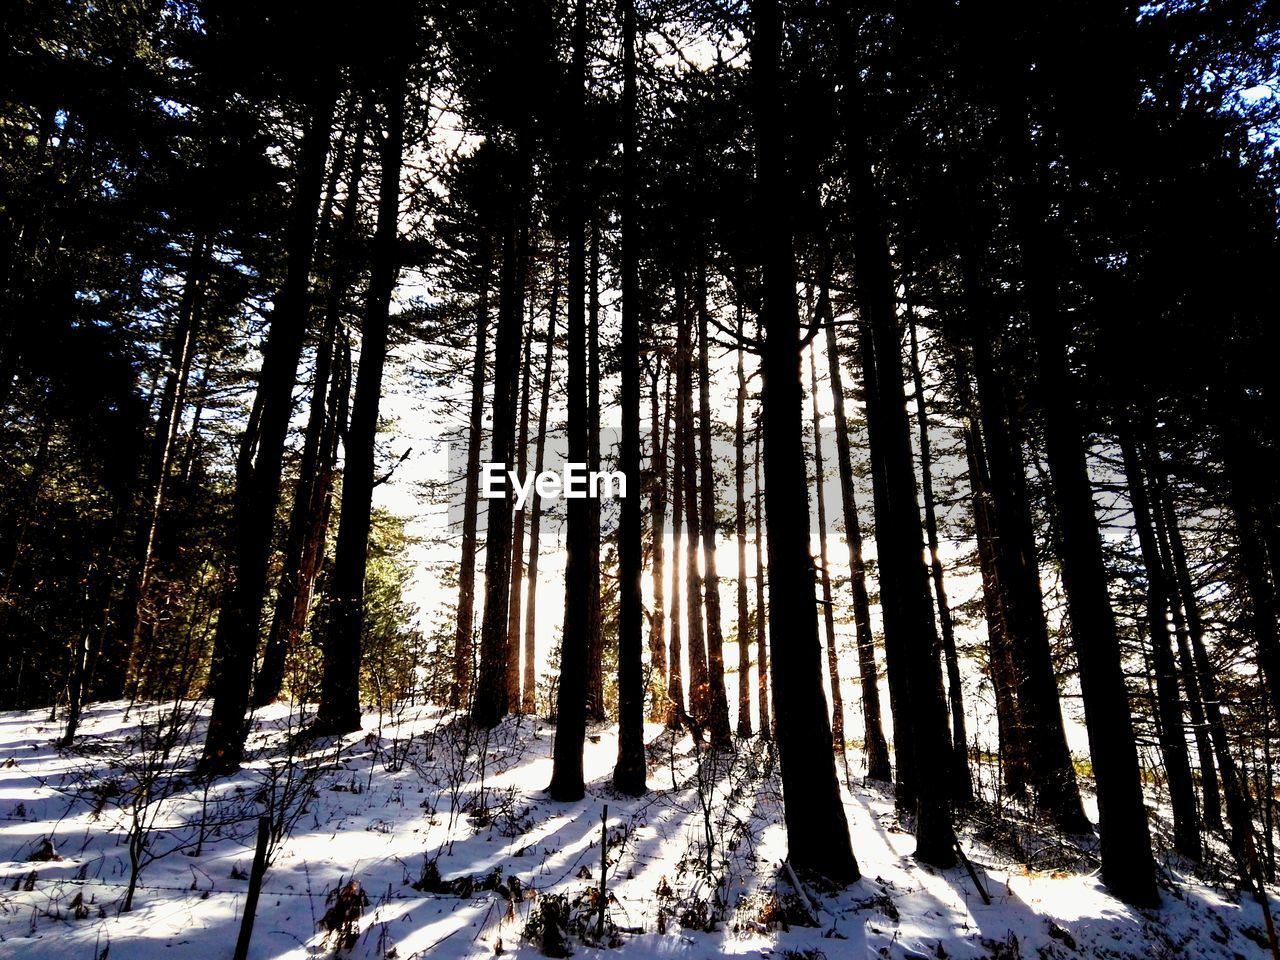 PINE TREES IN FOREST DURING WINTER SEASON